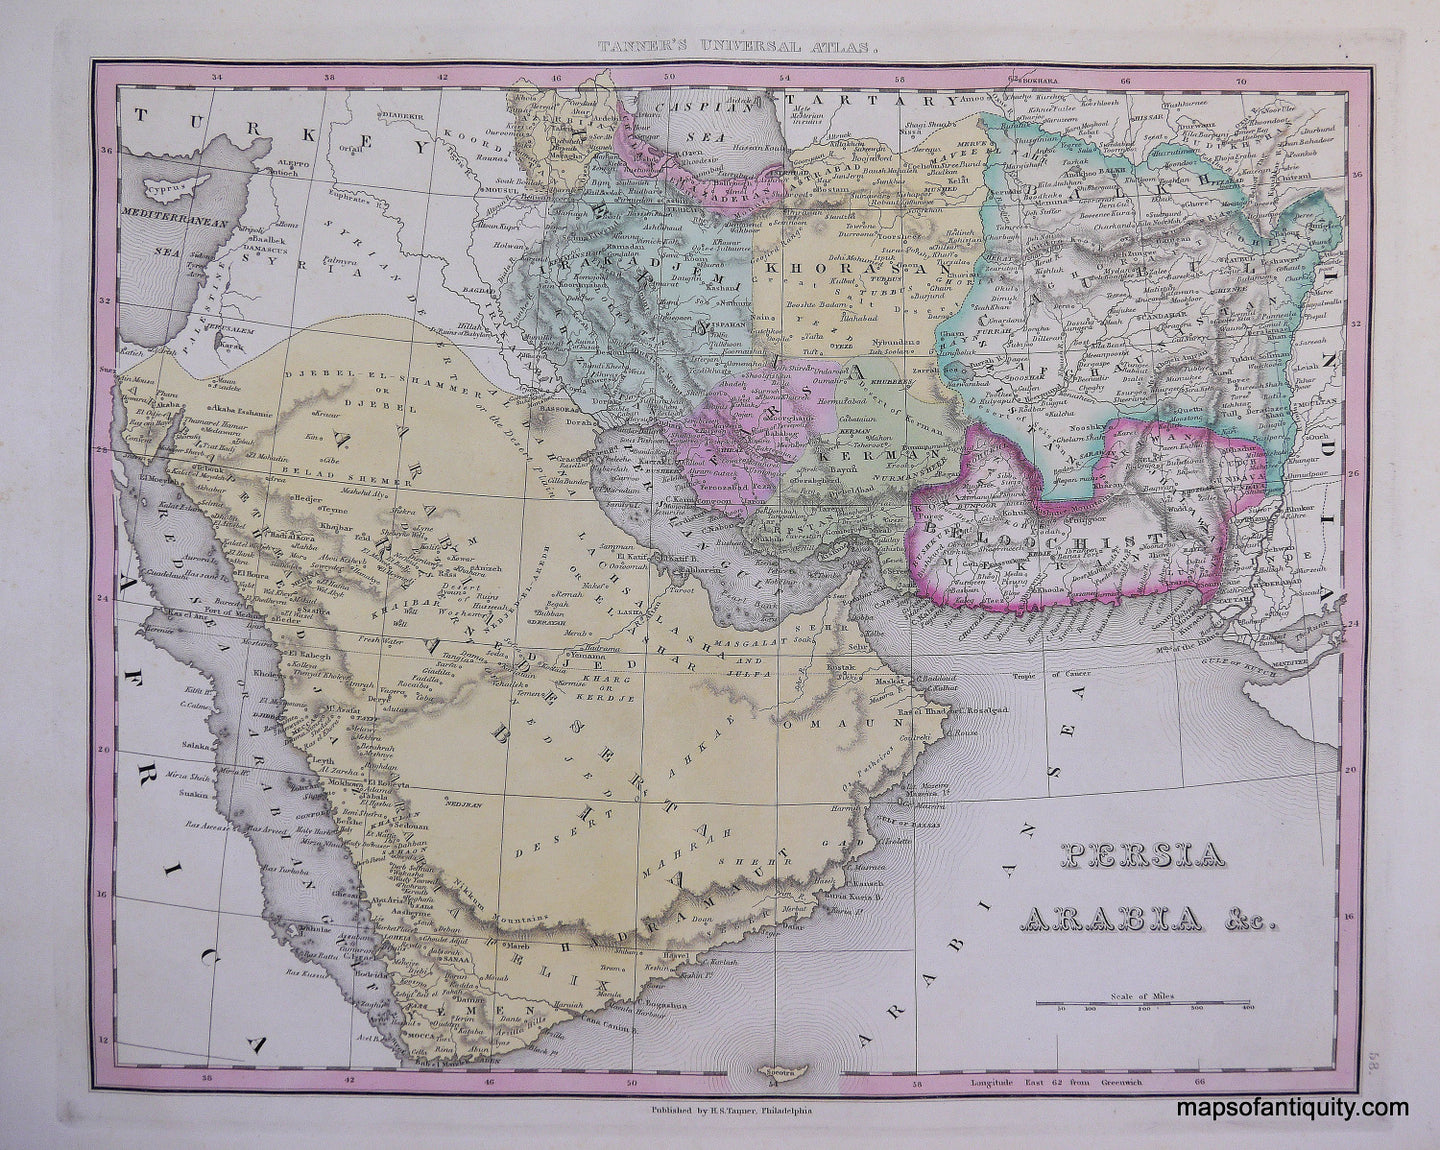 Antique-Hand-Colored-Engraved-Map-Persia-and-Arabia-Middle-East-and-Holy-Land--c.-1840-Tanner-Maps-Of-Antiquity